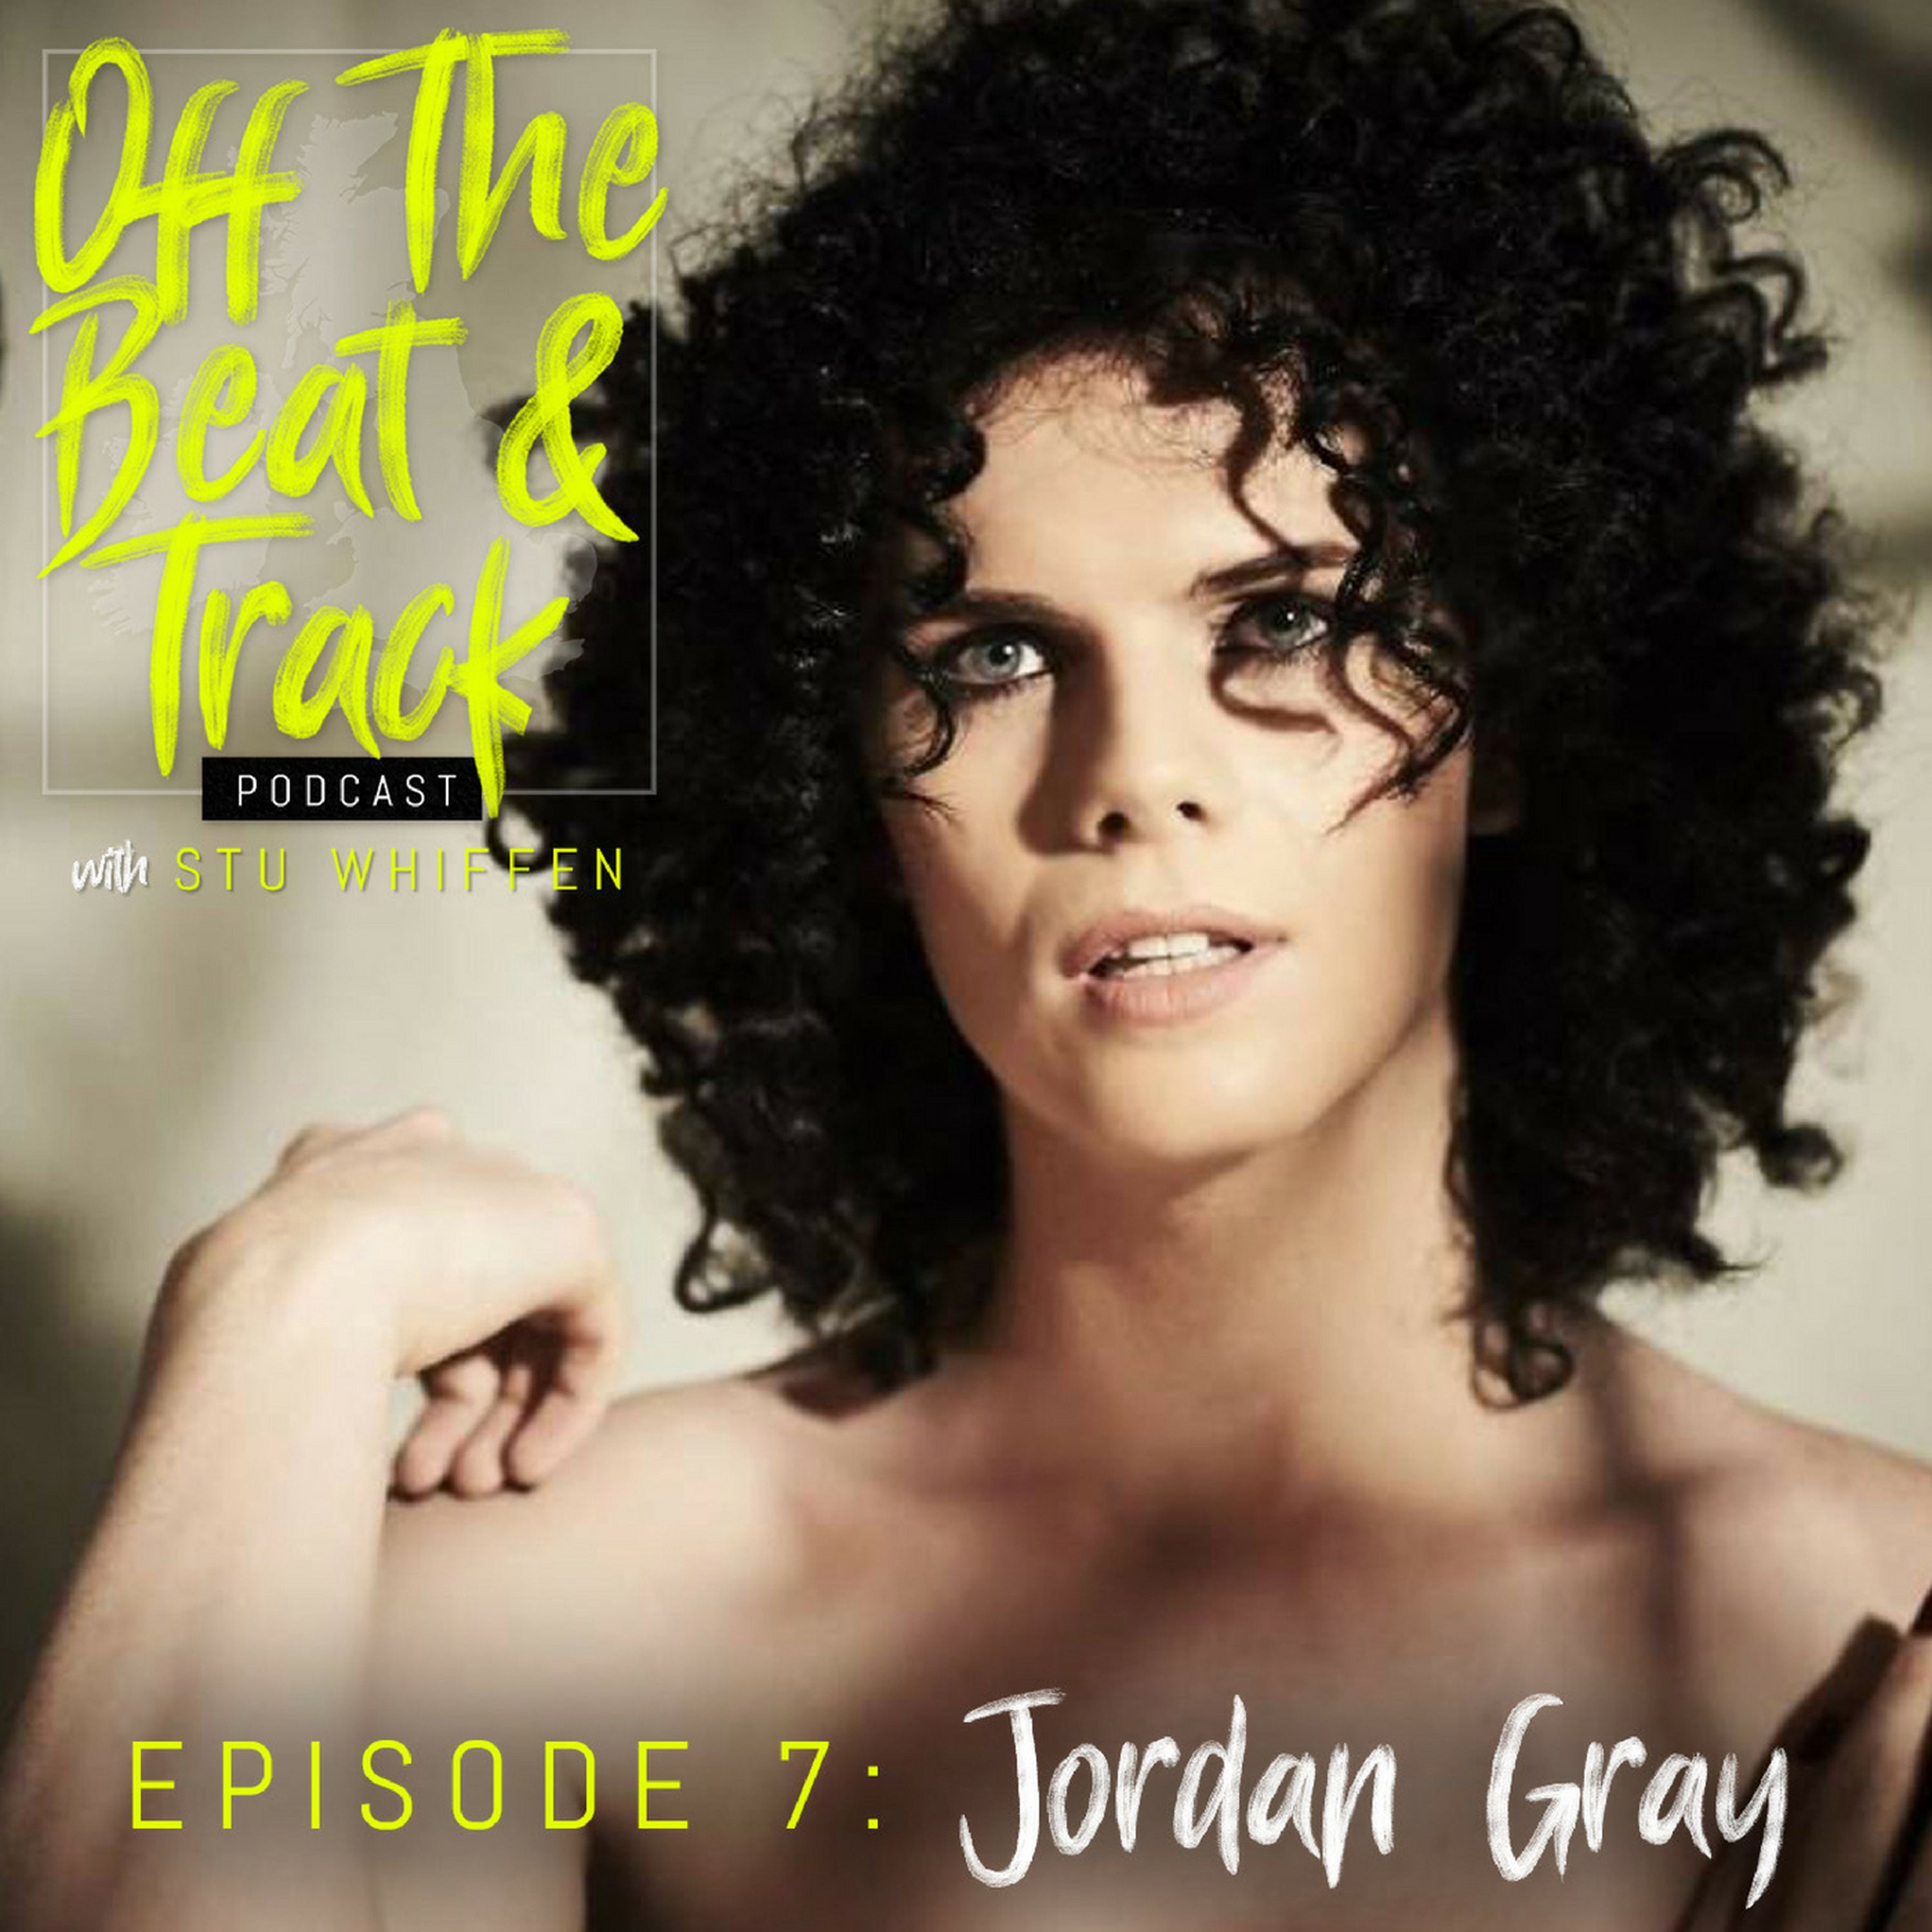 Special Guest Jordan Gray Off The Beat And Track On Acast 